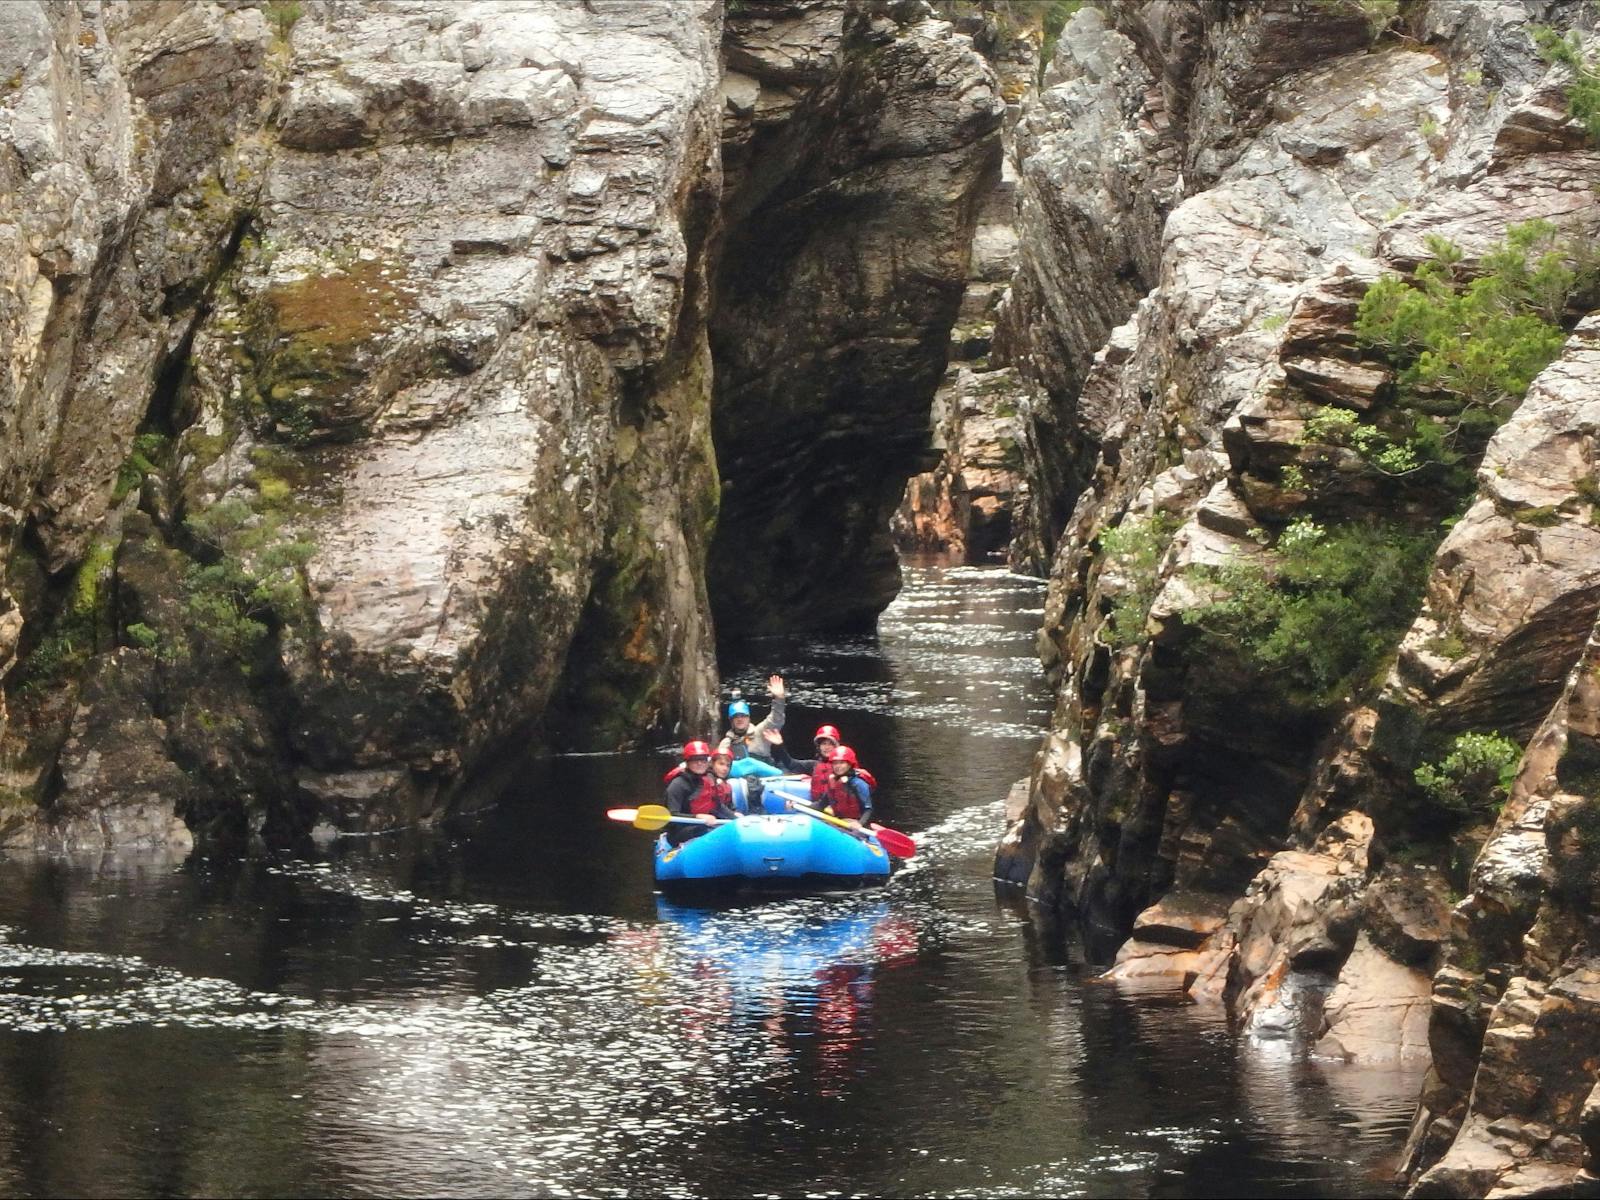 Drifting through the Irenabyss on a Franklin River rafting trip